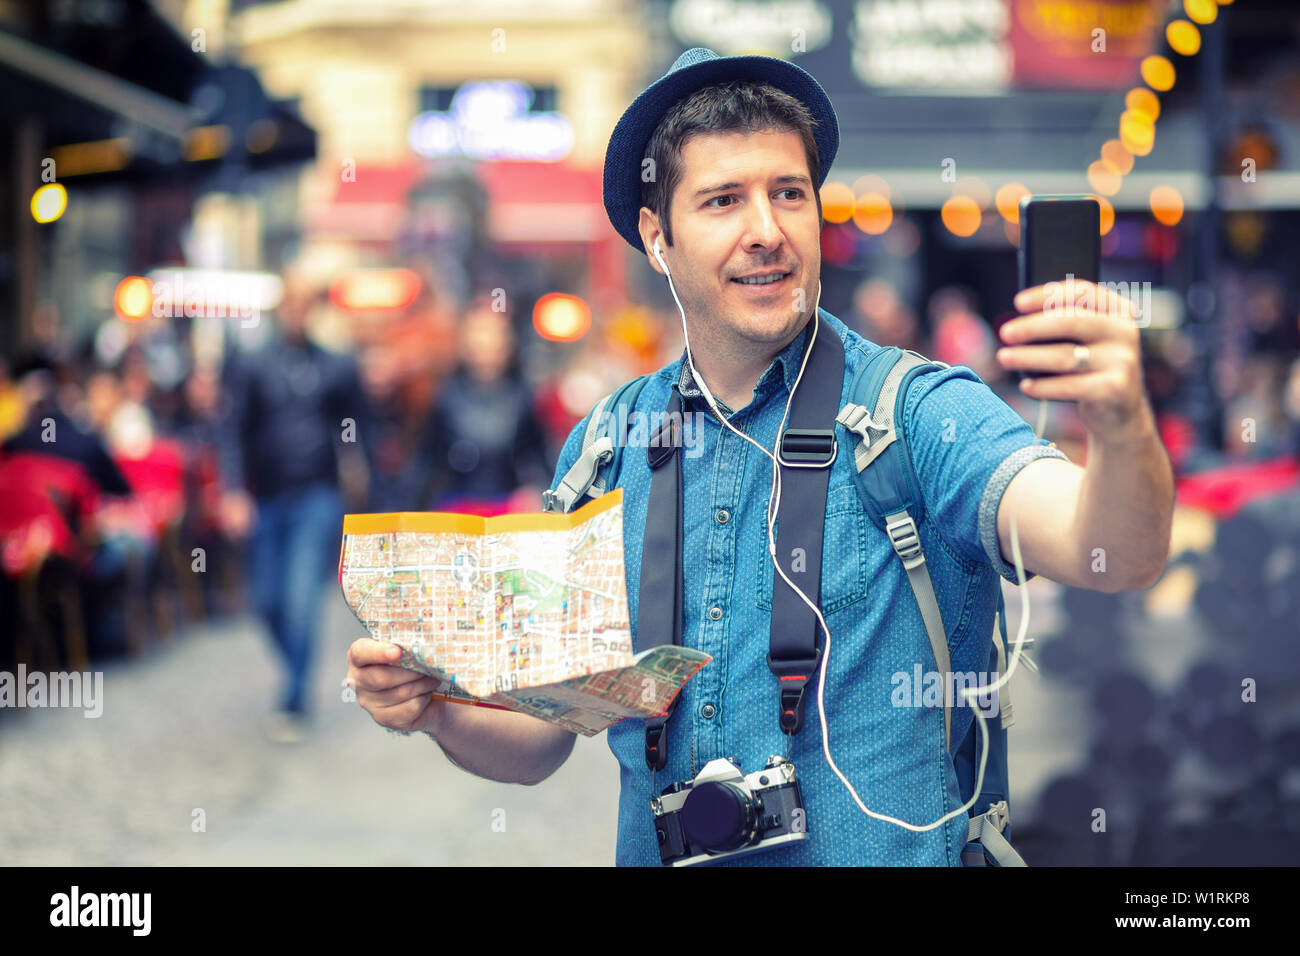 Smiling tourist in London taking selfie on crowded streets full of pubs Stock Photo